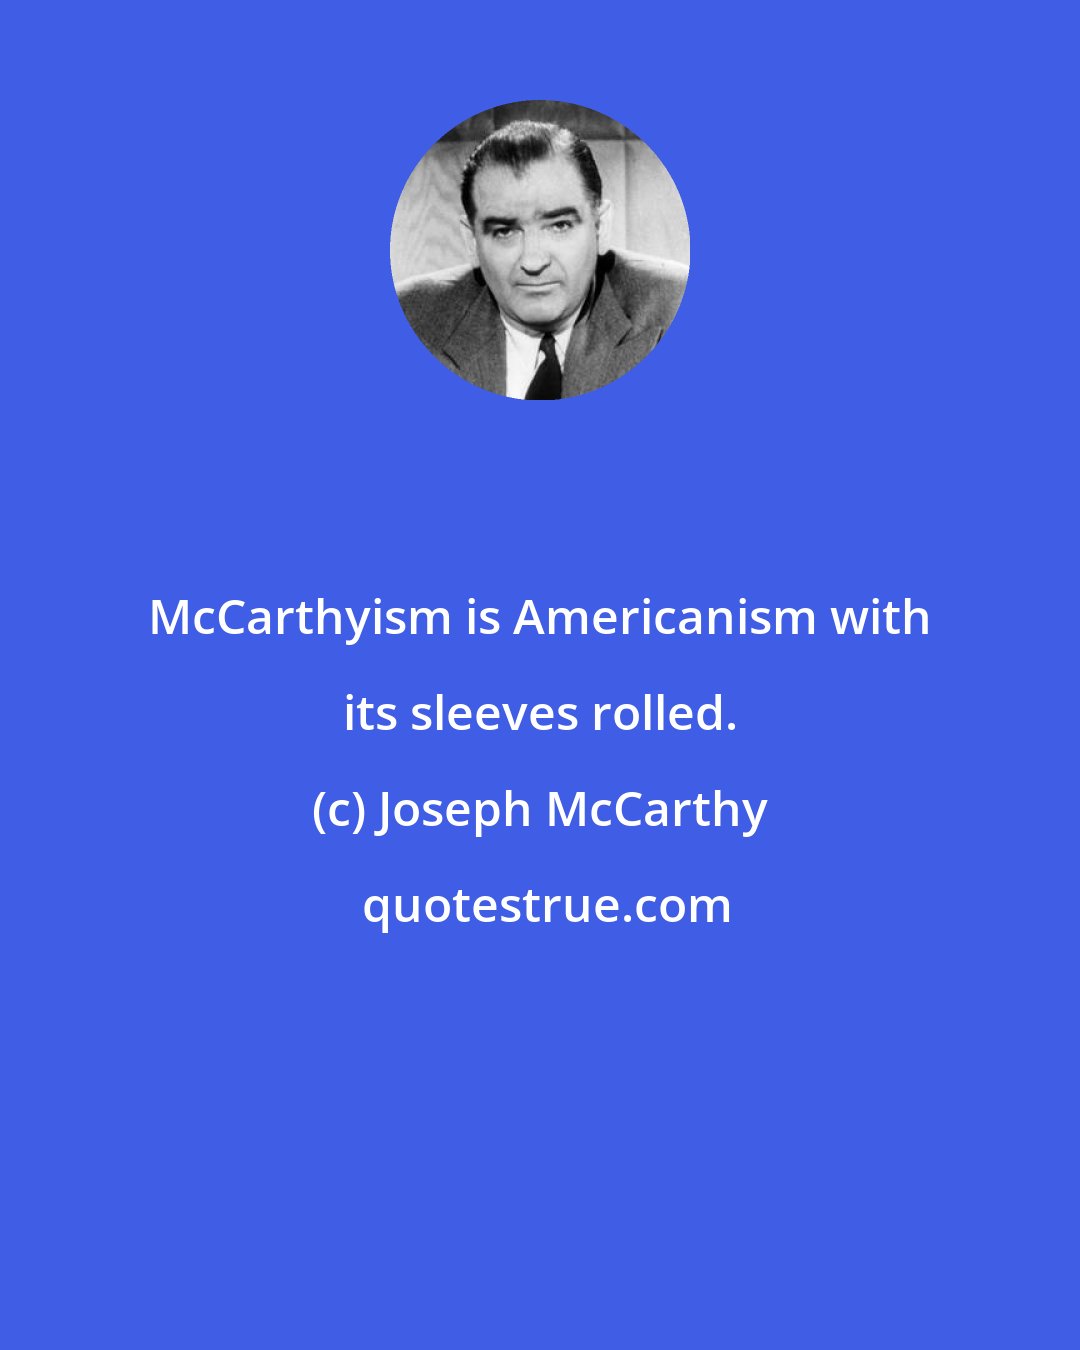 Joseph McCarthy: McCarthyism is Americanism with its sleeves rolled.